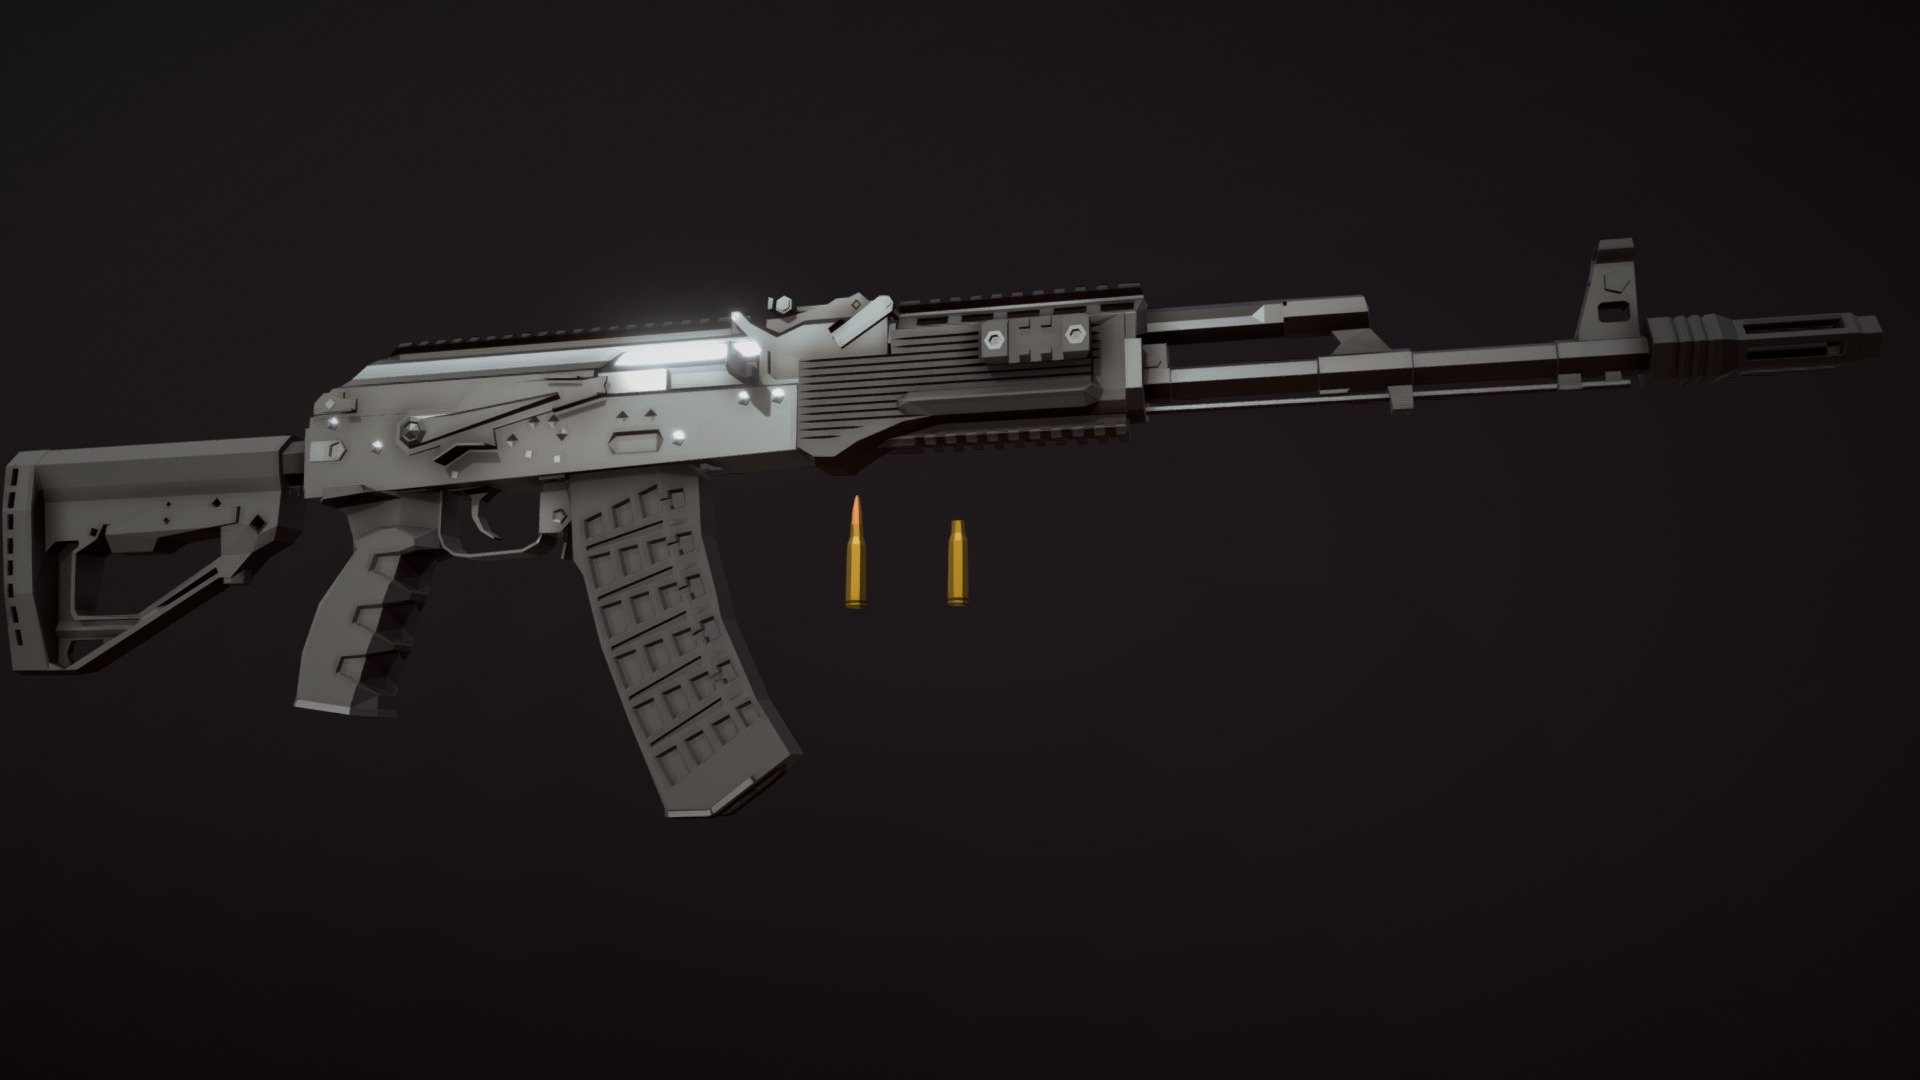 Low-Poly model of the AK-200, part of the 200-series of rifles developed and sold by Kalashnikov group, and a modernization of the AK-74m, with a new stock, grip, dustcover with attachment rail and different disassembly procedure, improved handguards, and a flash hider instead of the muzzle brake/closed chamber compensator of AK-74m 3d model